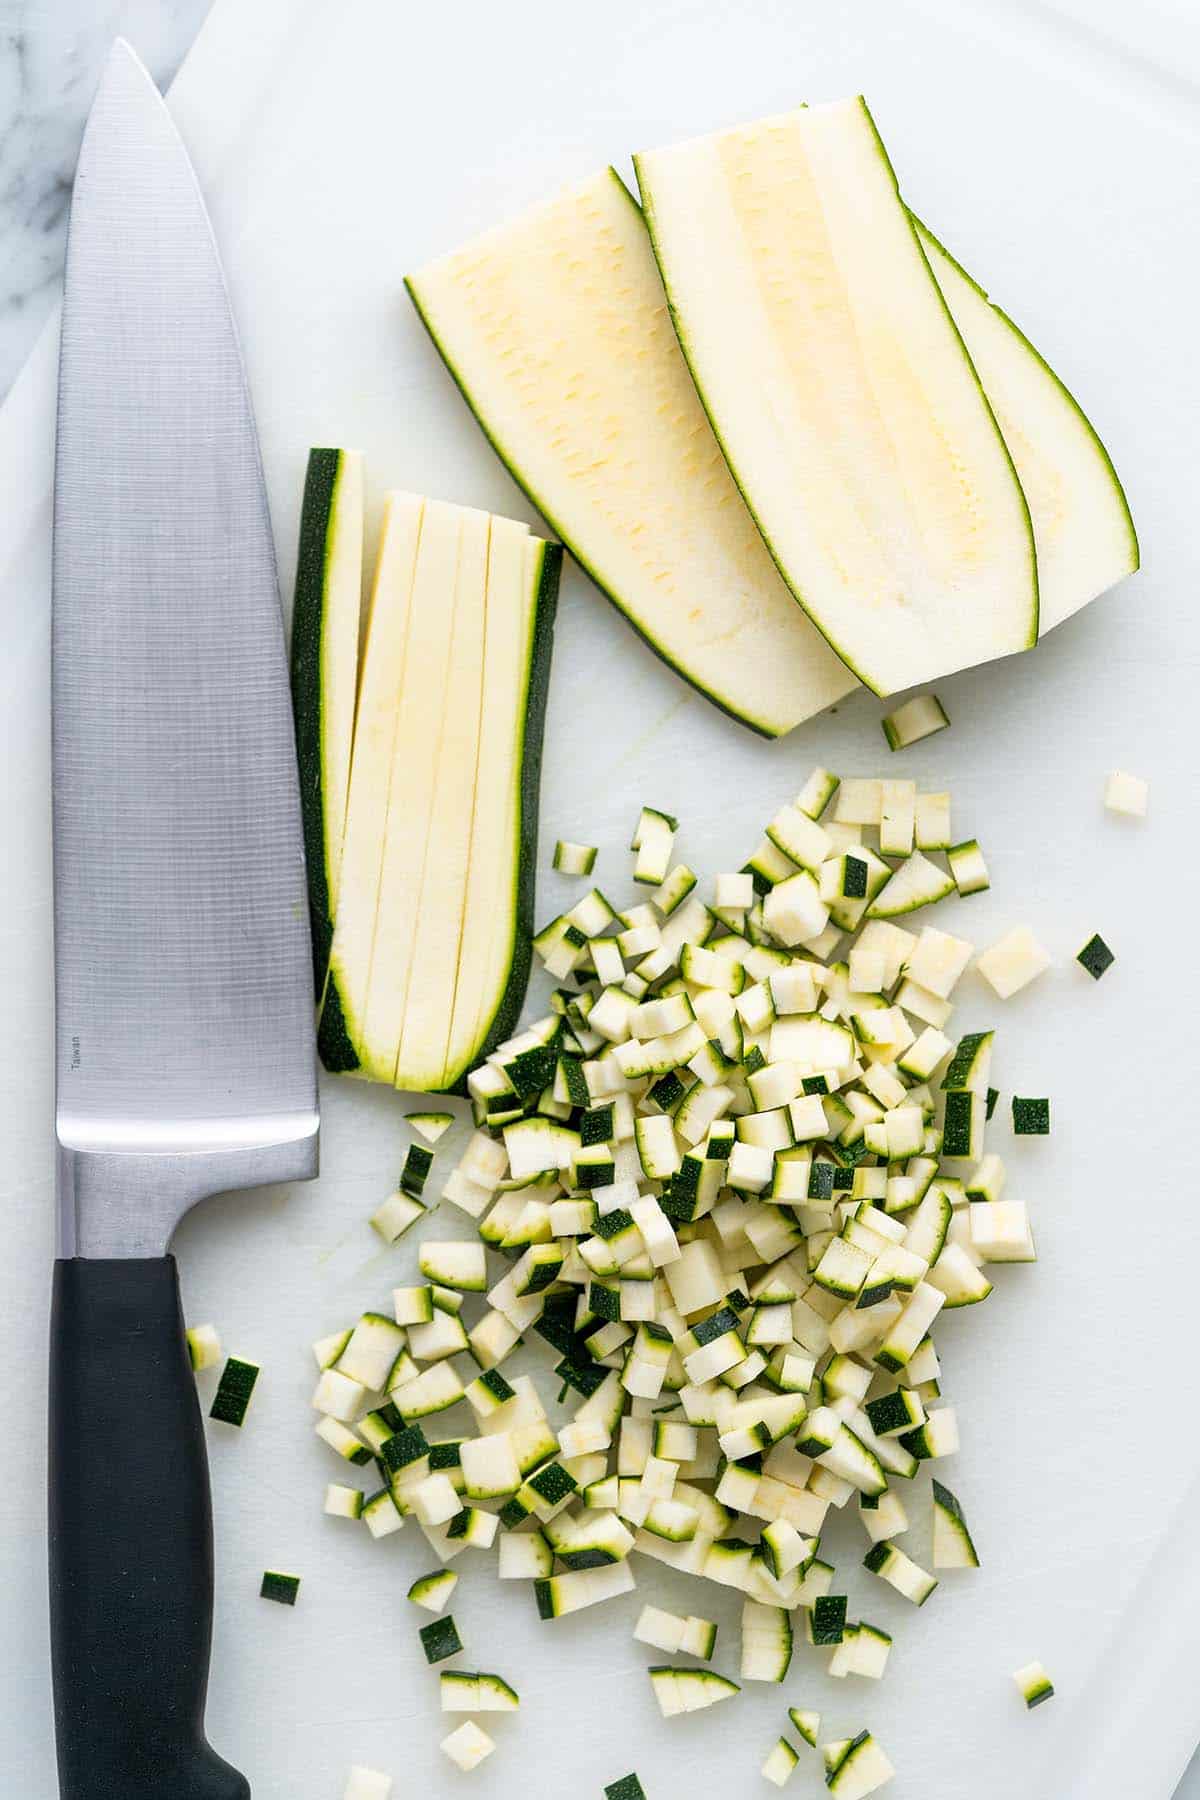 how to chop zucchini for vegetable fritters